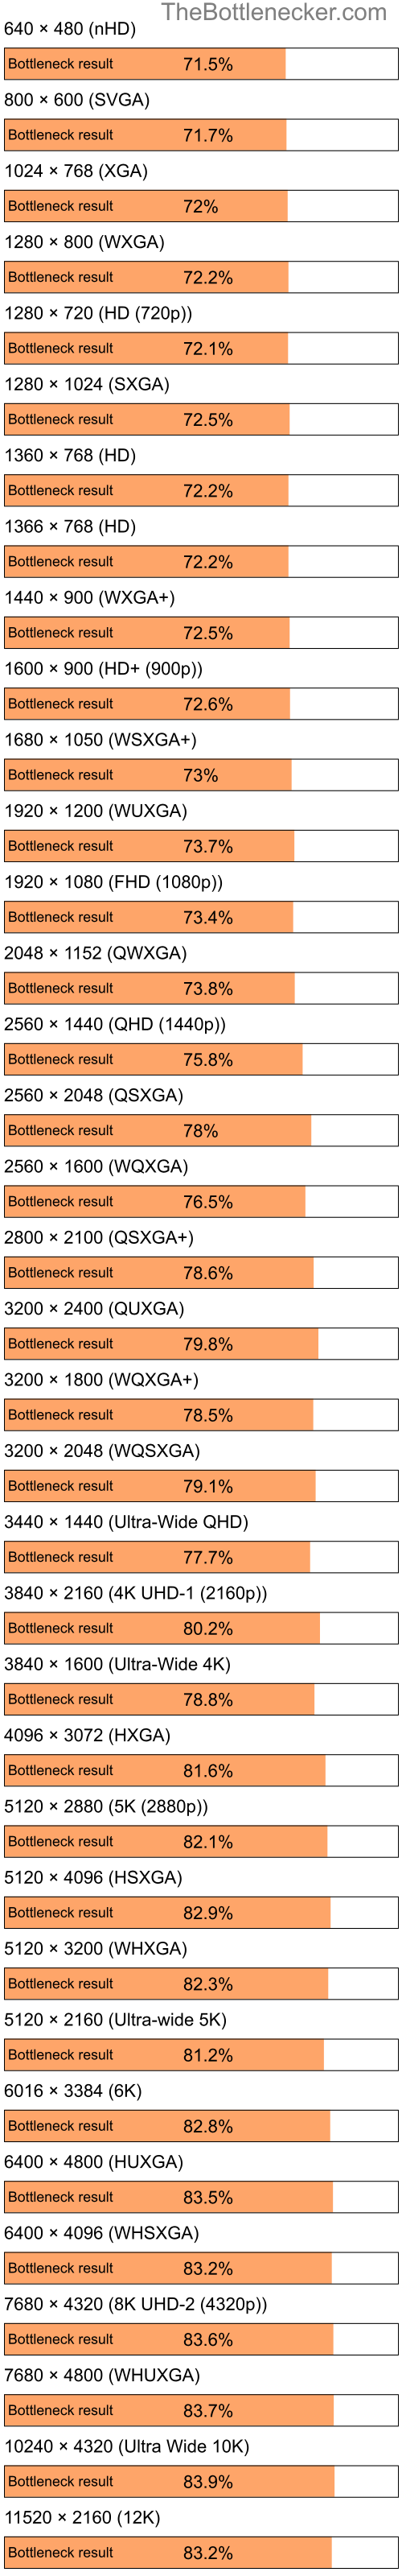 Bottleneck results by resolution for Intel Pentium 4 and AMD Mobility Radeon X1400 in General Tasks